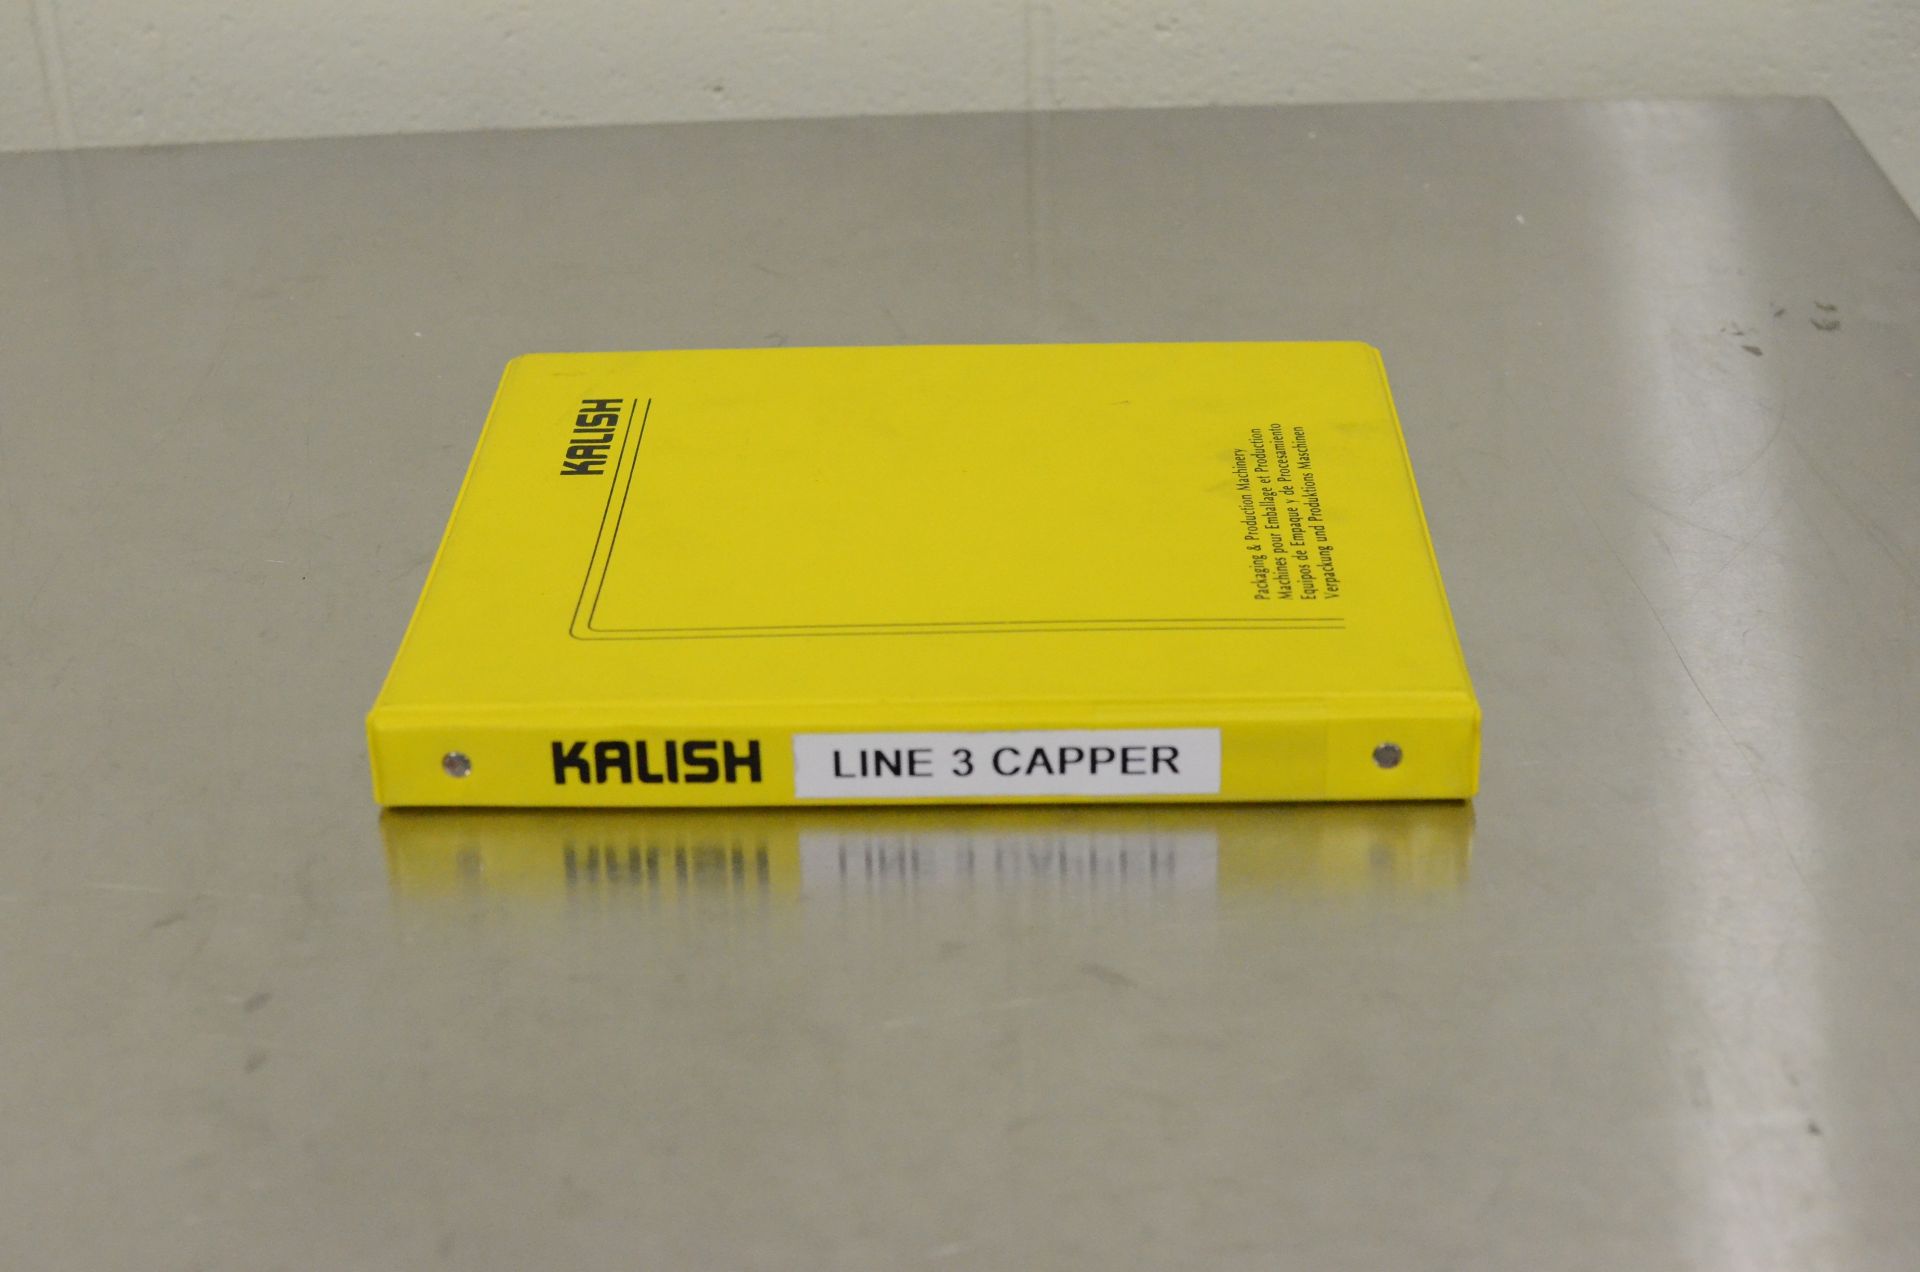 Kalish 5005 SuperCap Capper with Feeder - Image 5 of 7